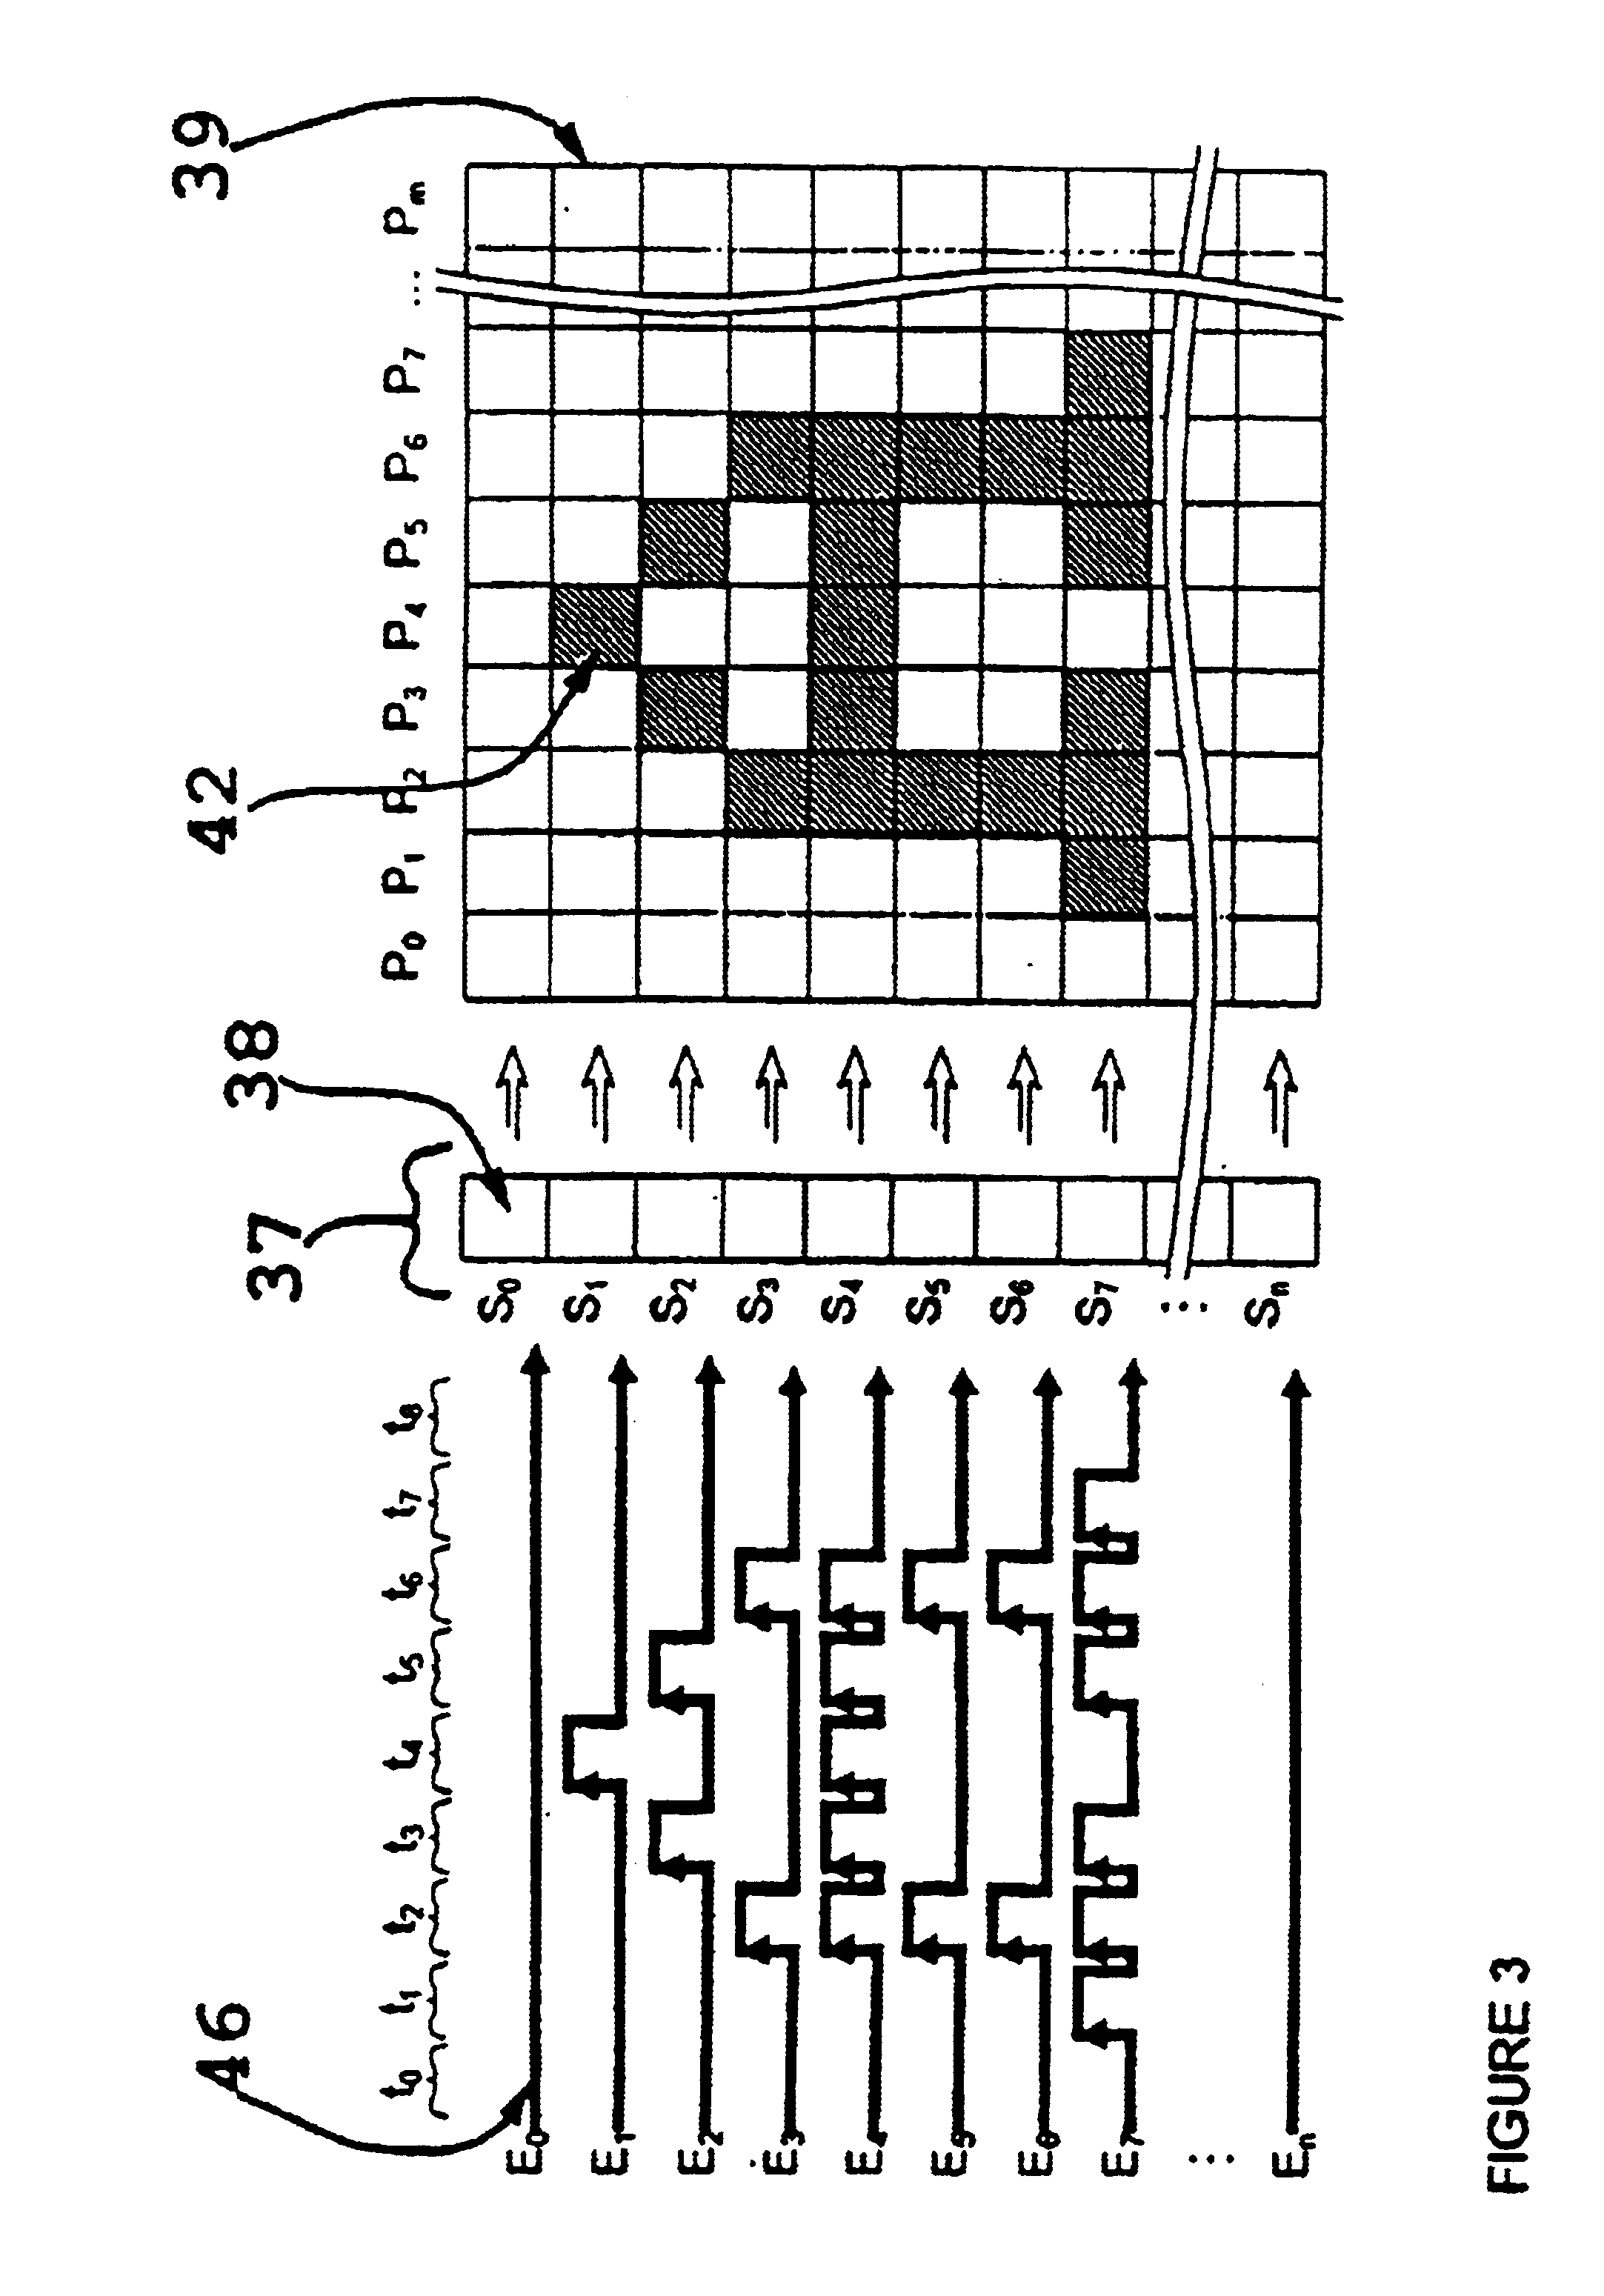 Method and apparatus for recording digital images on photosensitive material